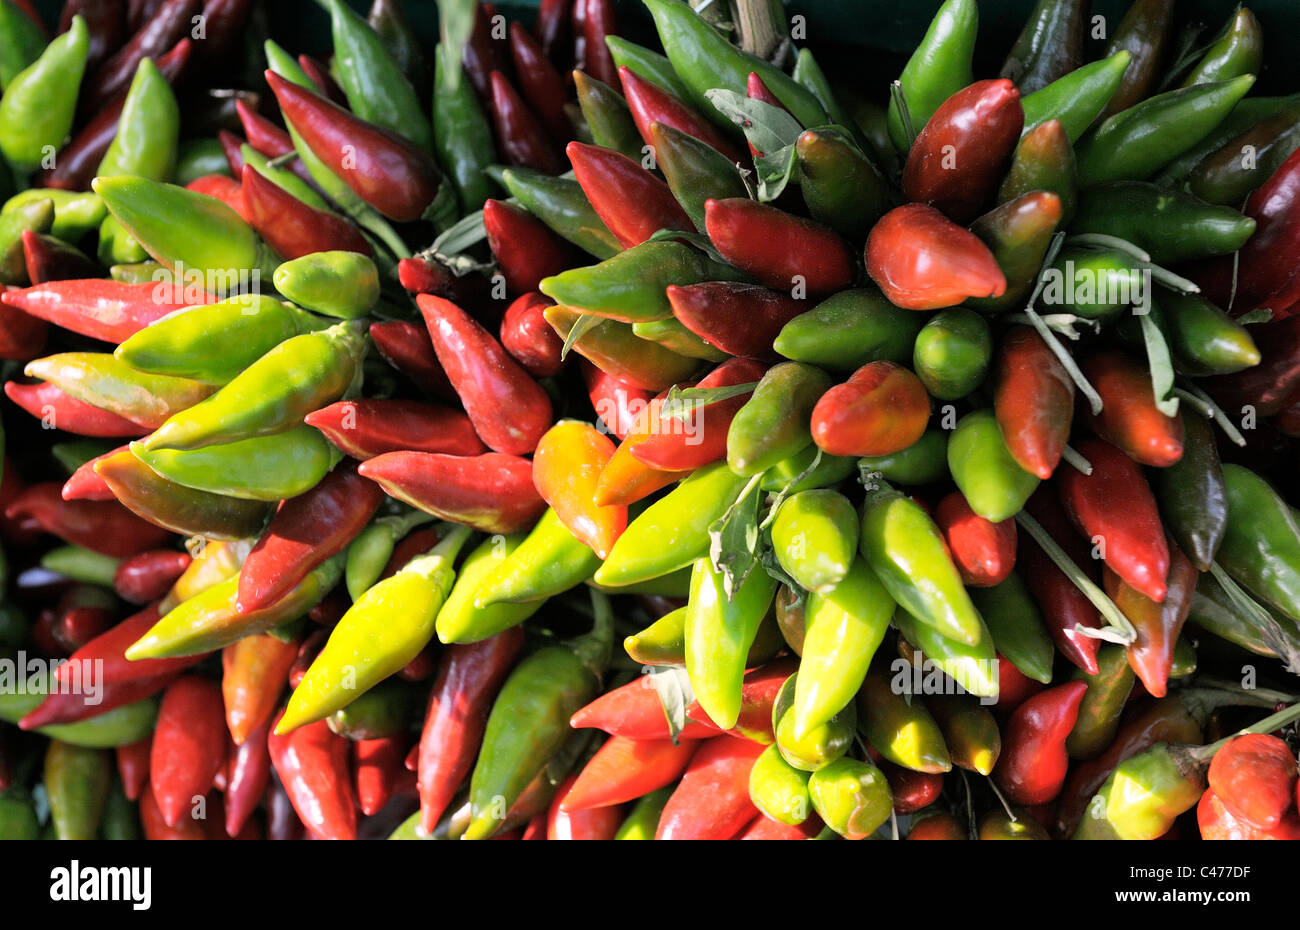 Bunch of red and green peppers pepper pods Stock Photo